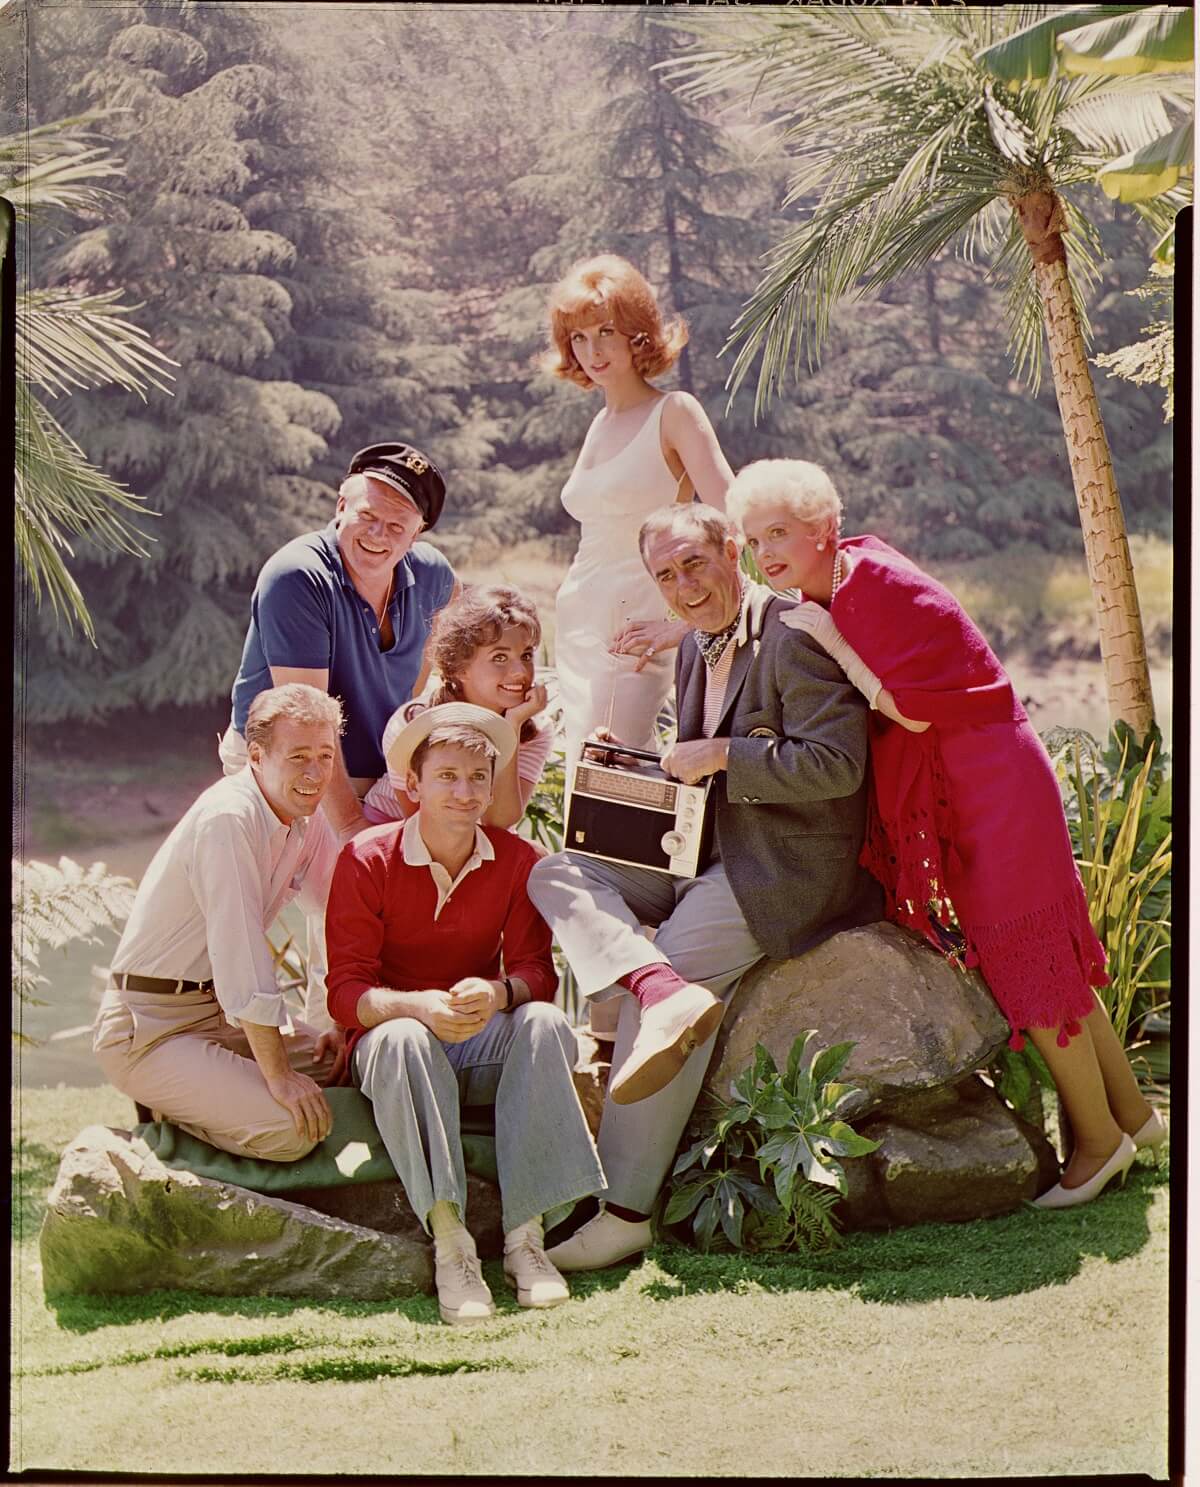 'Gilligan's Island' cast member posing on set for a promotional photo.